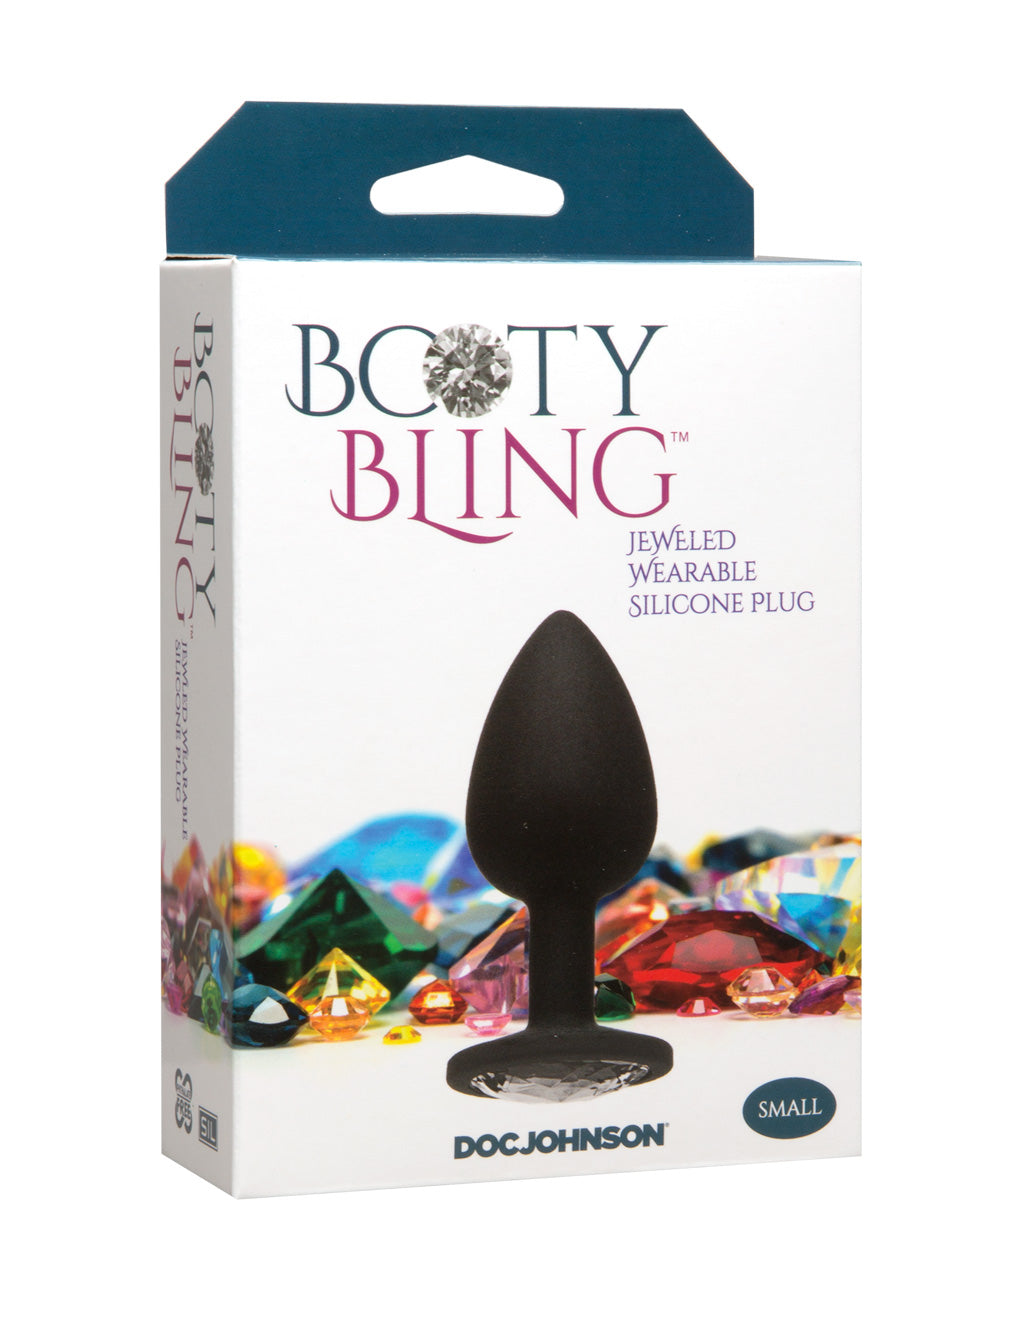 Booty Bling Plug S by Doc Johnson Silver Box